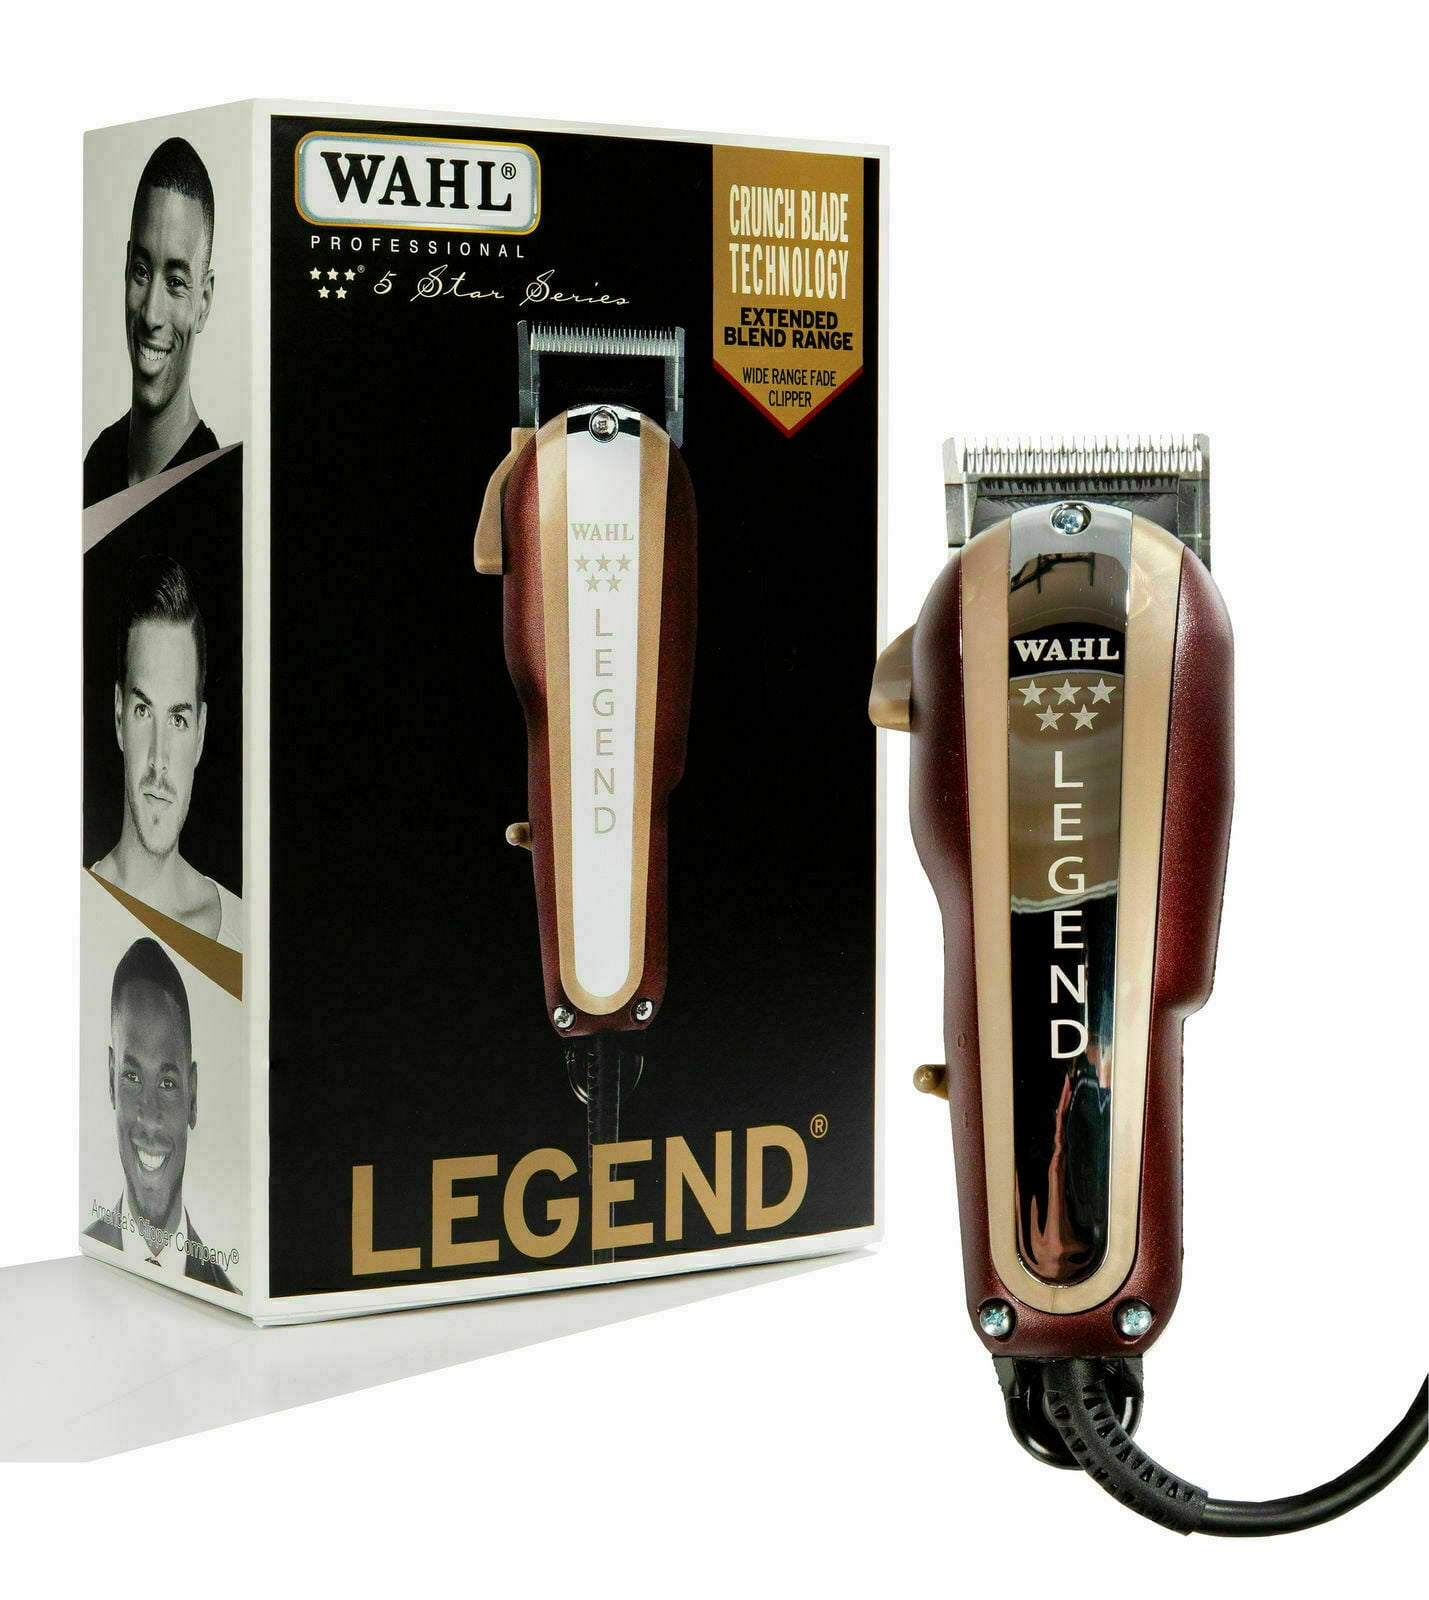 Buy Wahl Legend 5 Star Series Fade Clipper Online at Lowest Price in